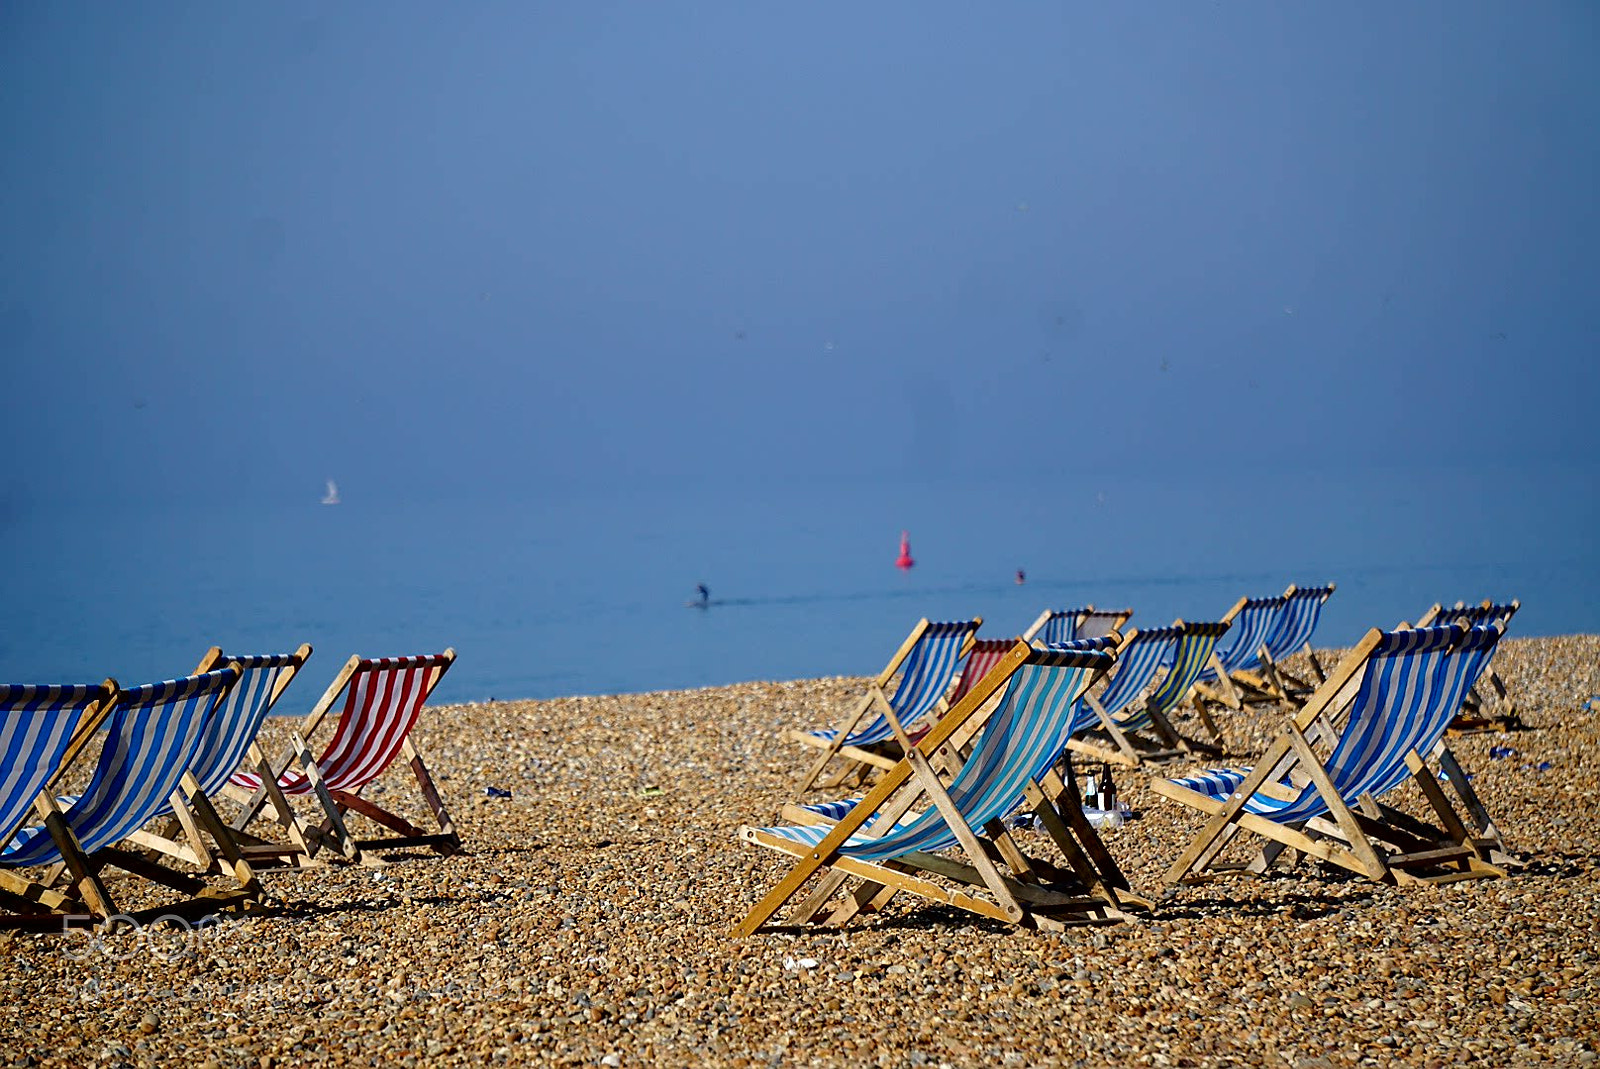 Sony a6000 sample photo. Deckchairs at the ready photography